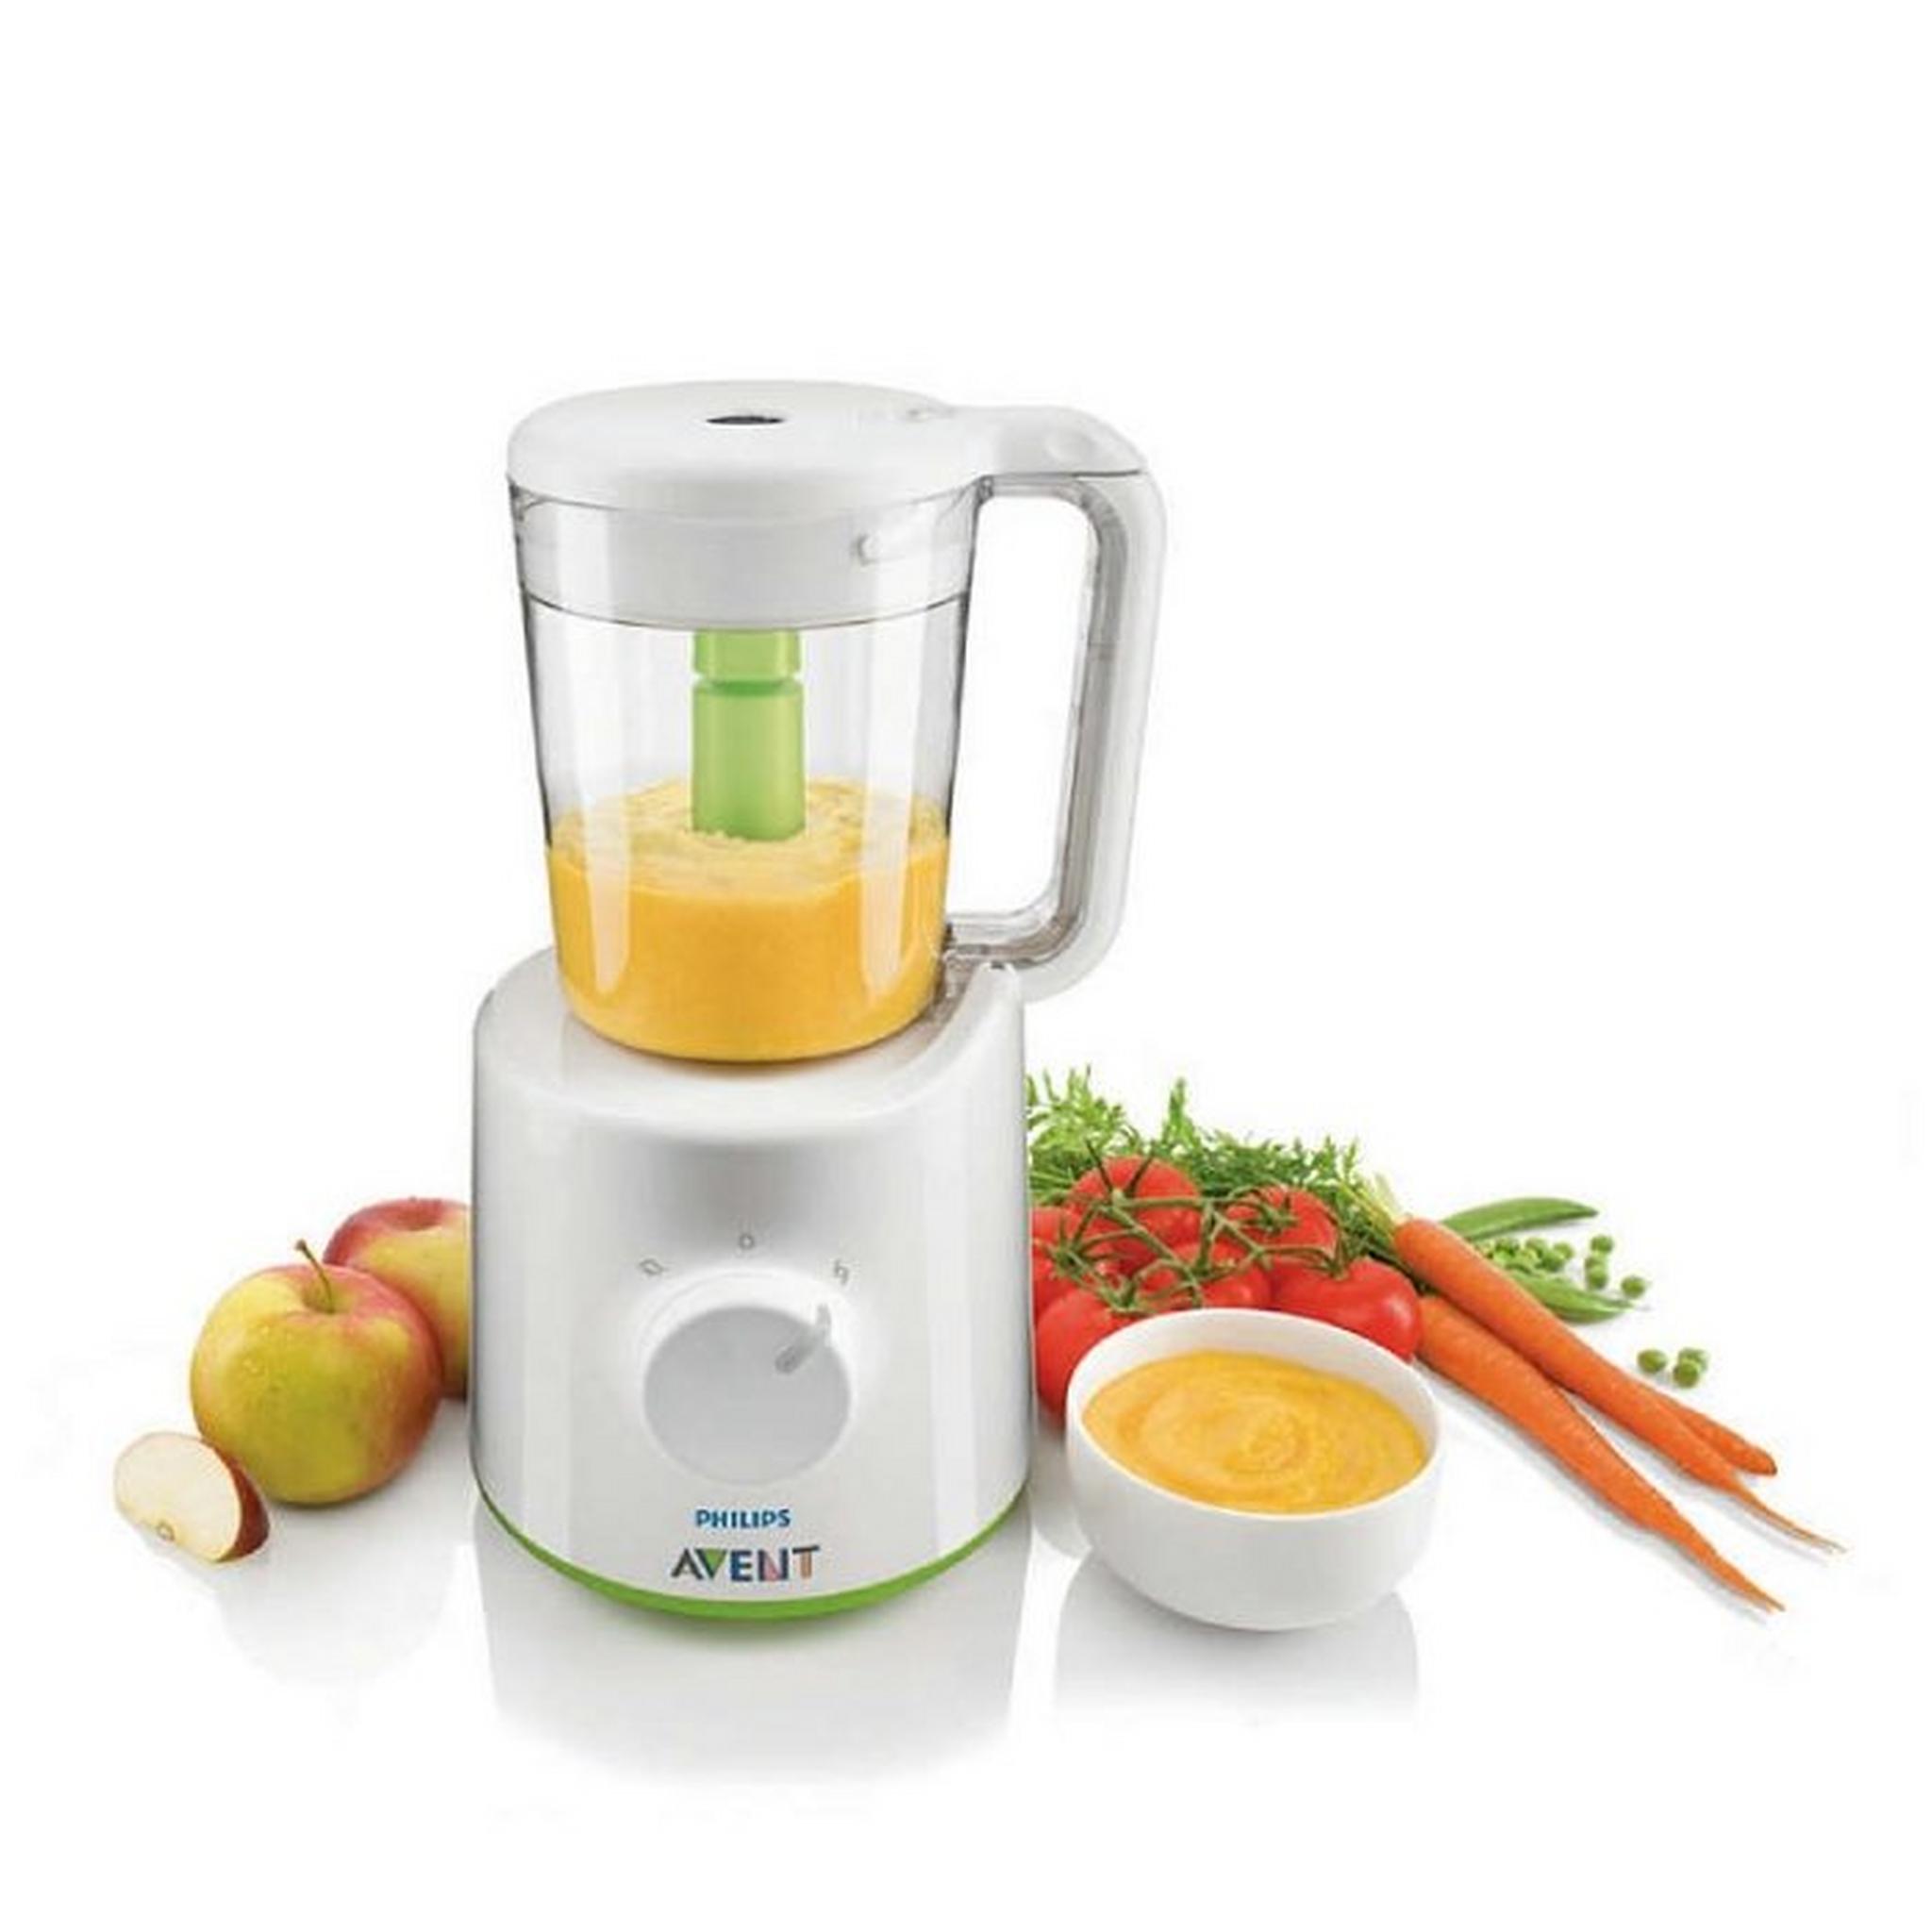 Philips Avent Combined Baby Food Steamer And Blender 